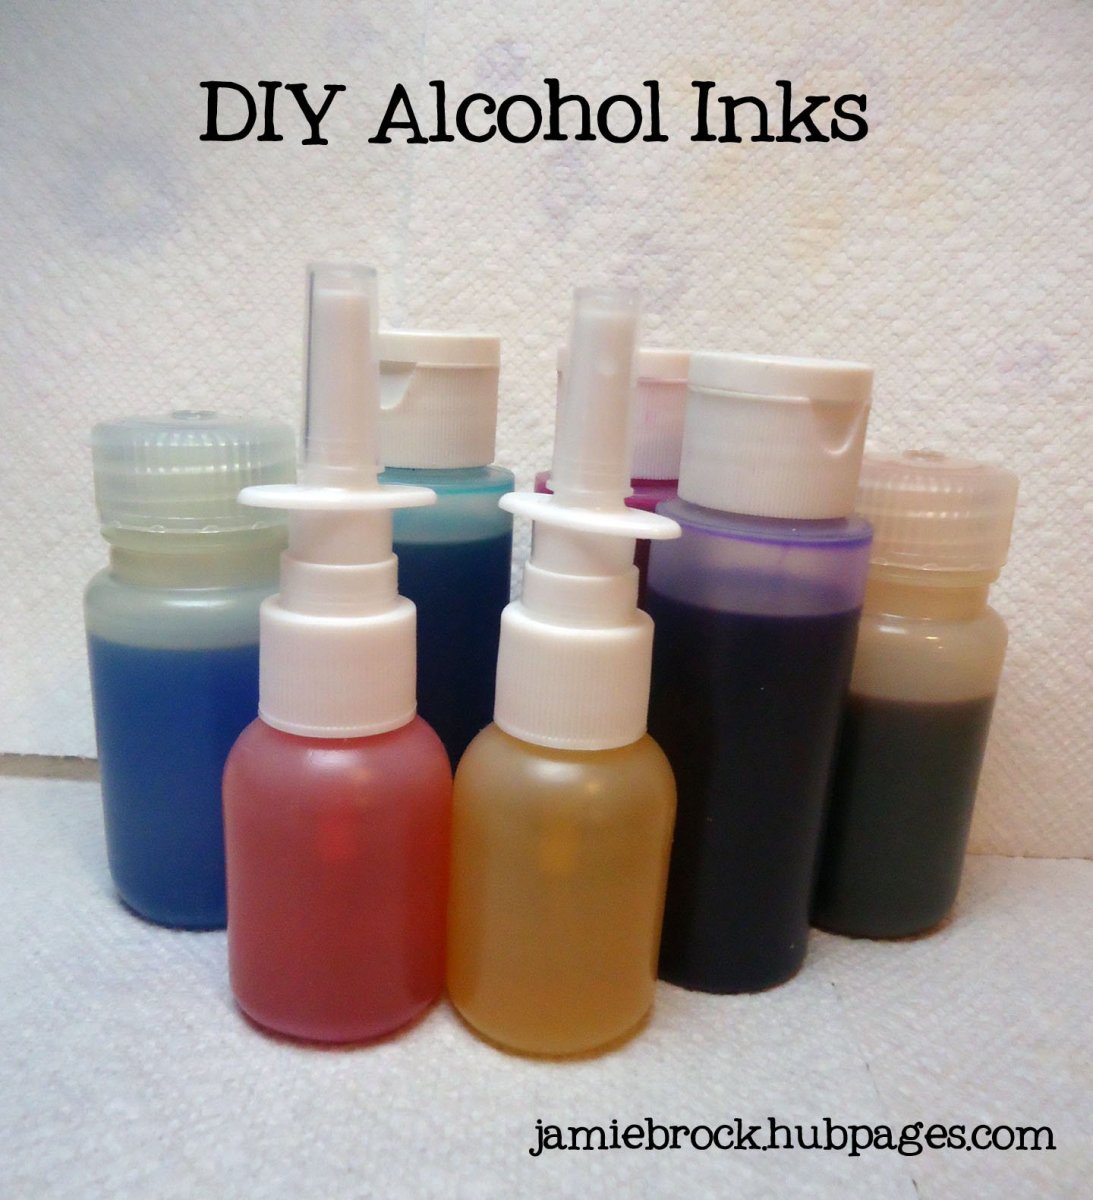 Learn how to make your own alcohol inks with this easy tutorial.